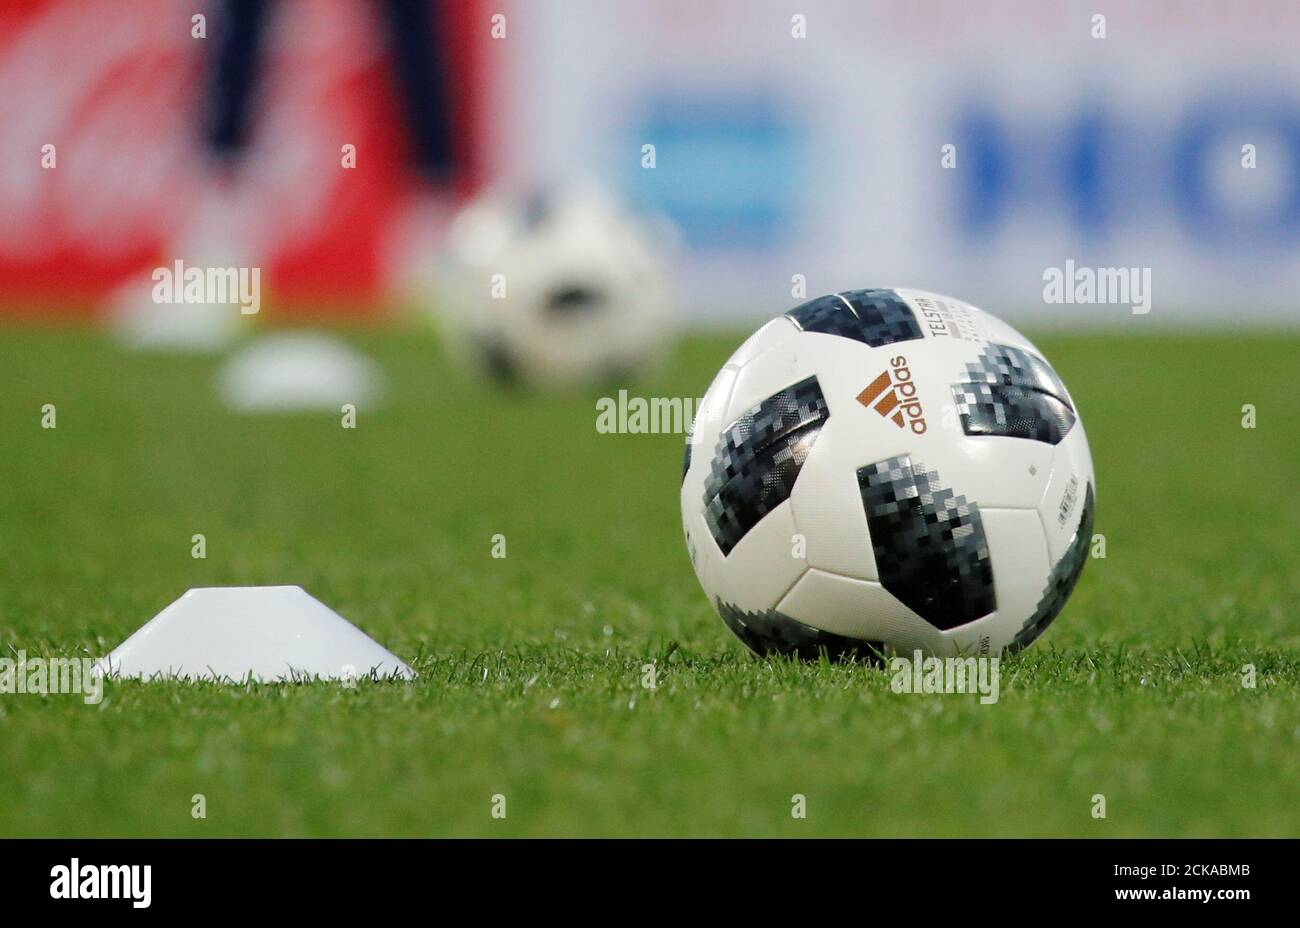 Telstar 18 High Resolution Stock Photography and Images - Alamy